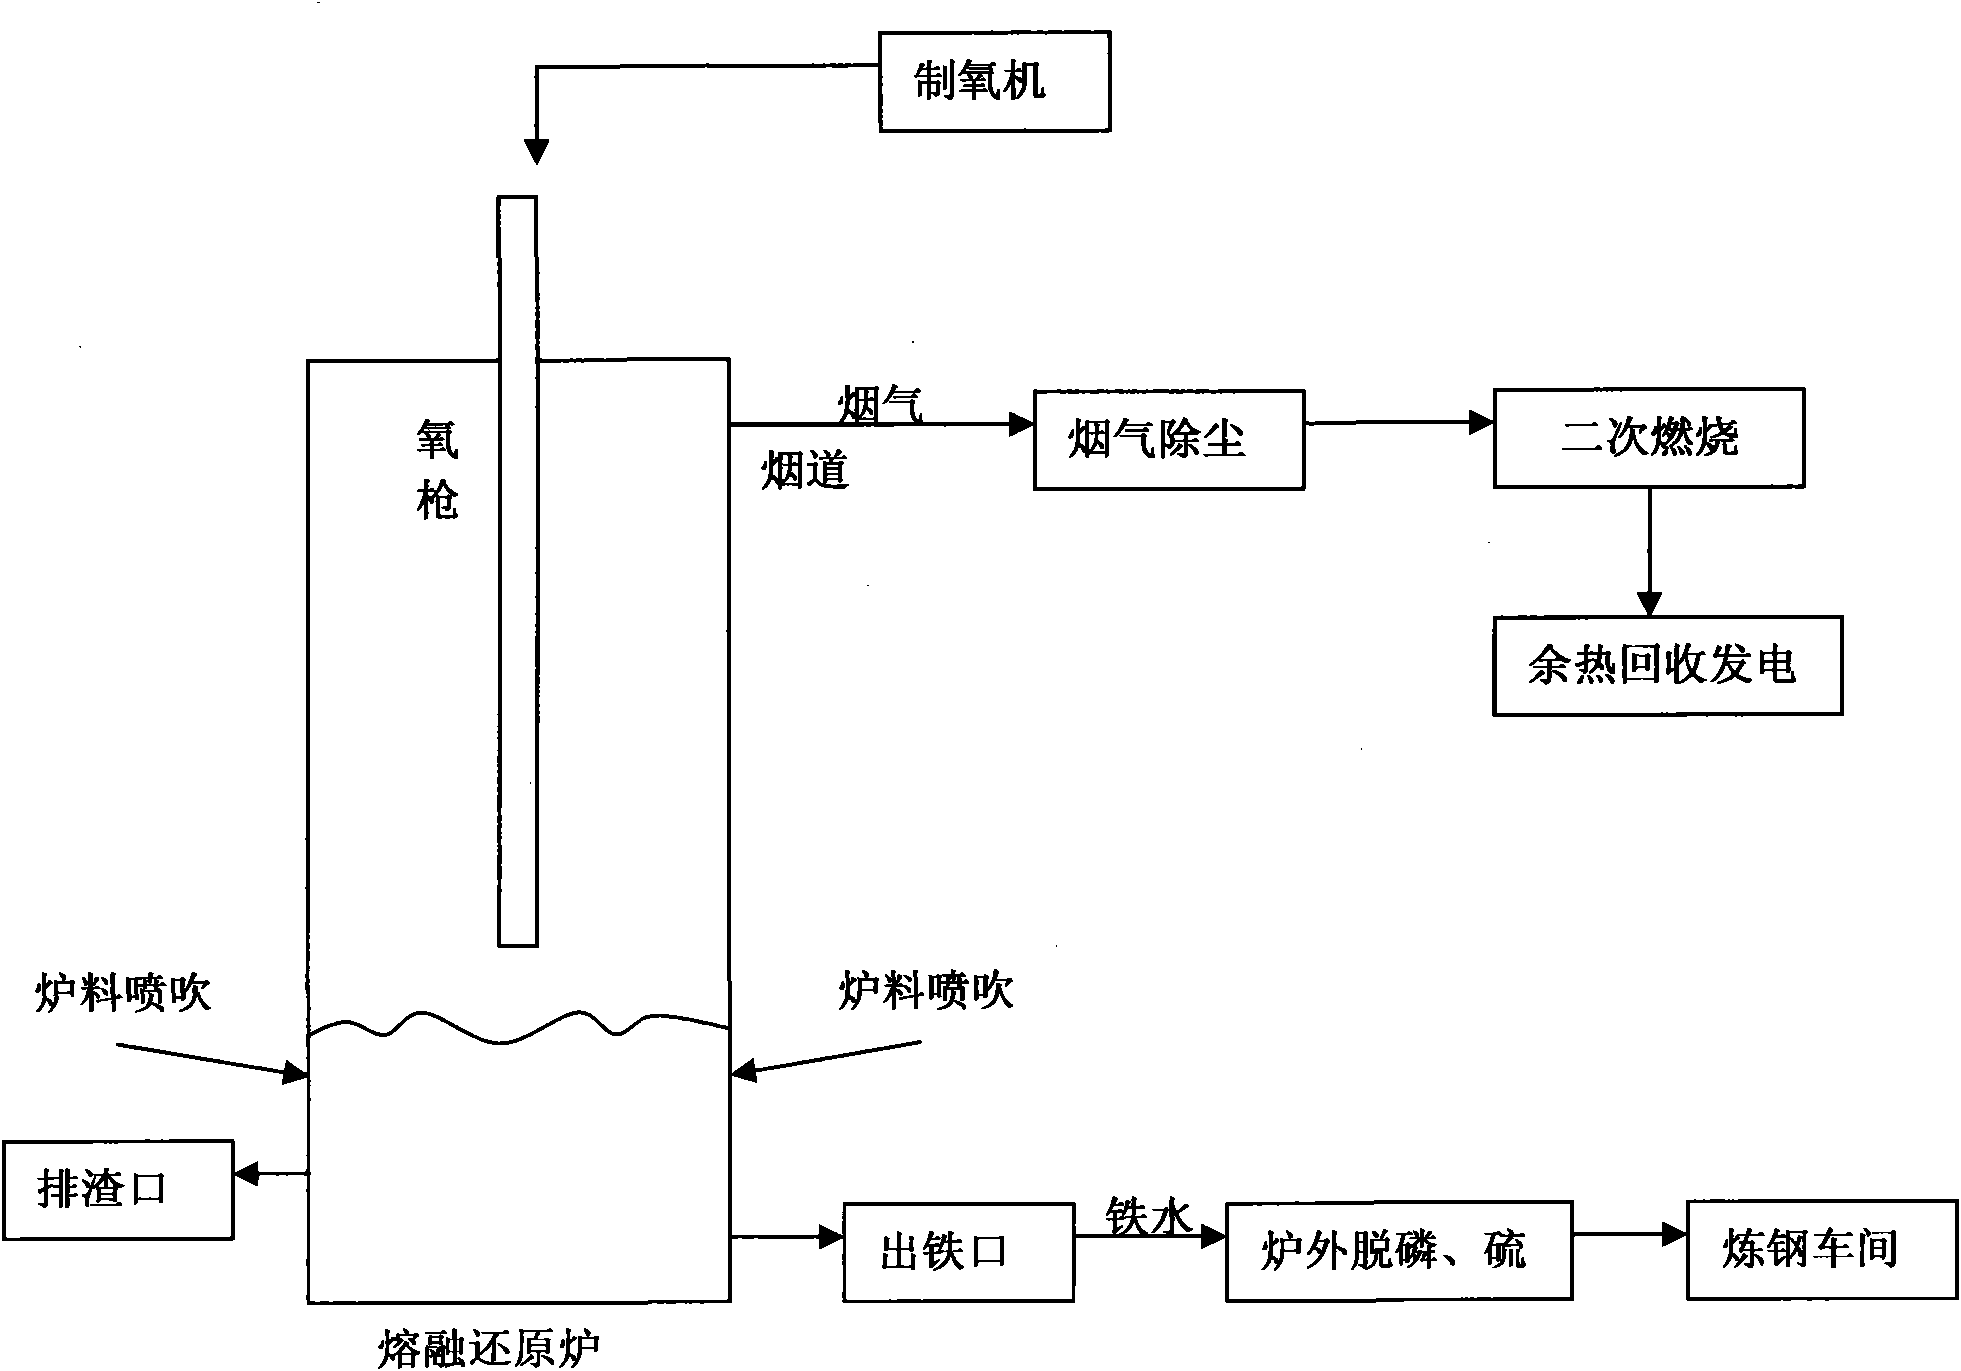 Method for producing low-phosphorus molten iron by utilizing oxygen-enriched top blown to carry out melting reduction on high-phosphorus iron ore